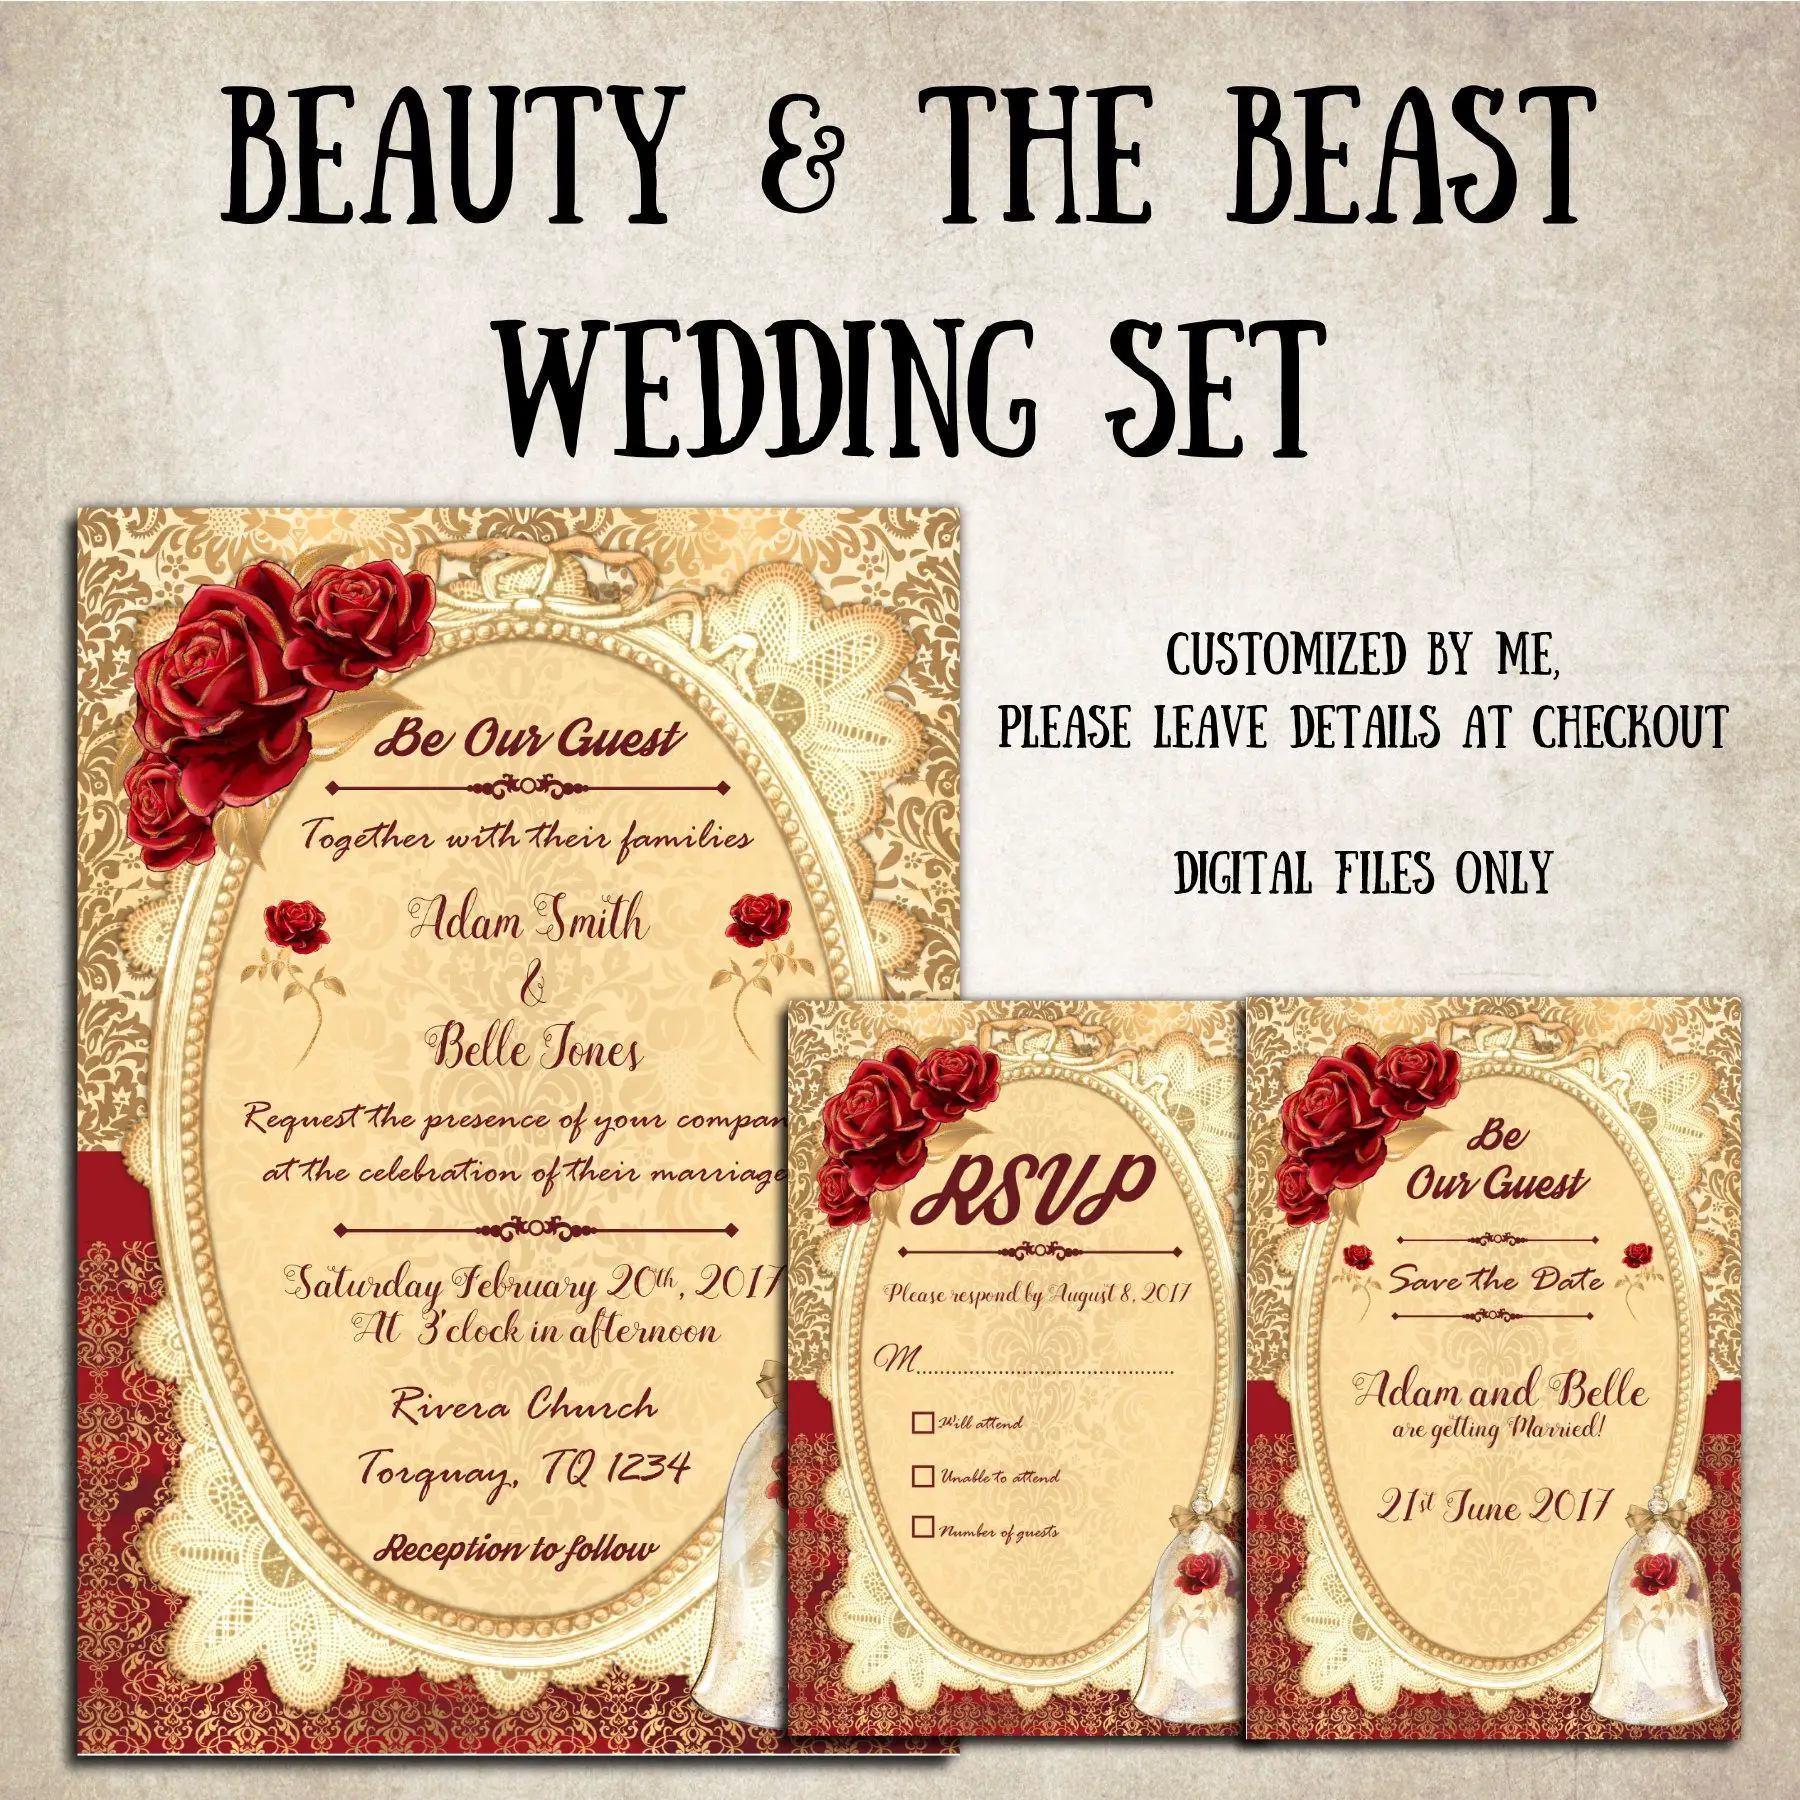 Beauty and the Beast Wedding Invitations with RSVâ¦